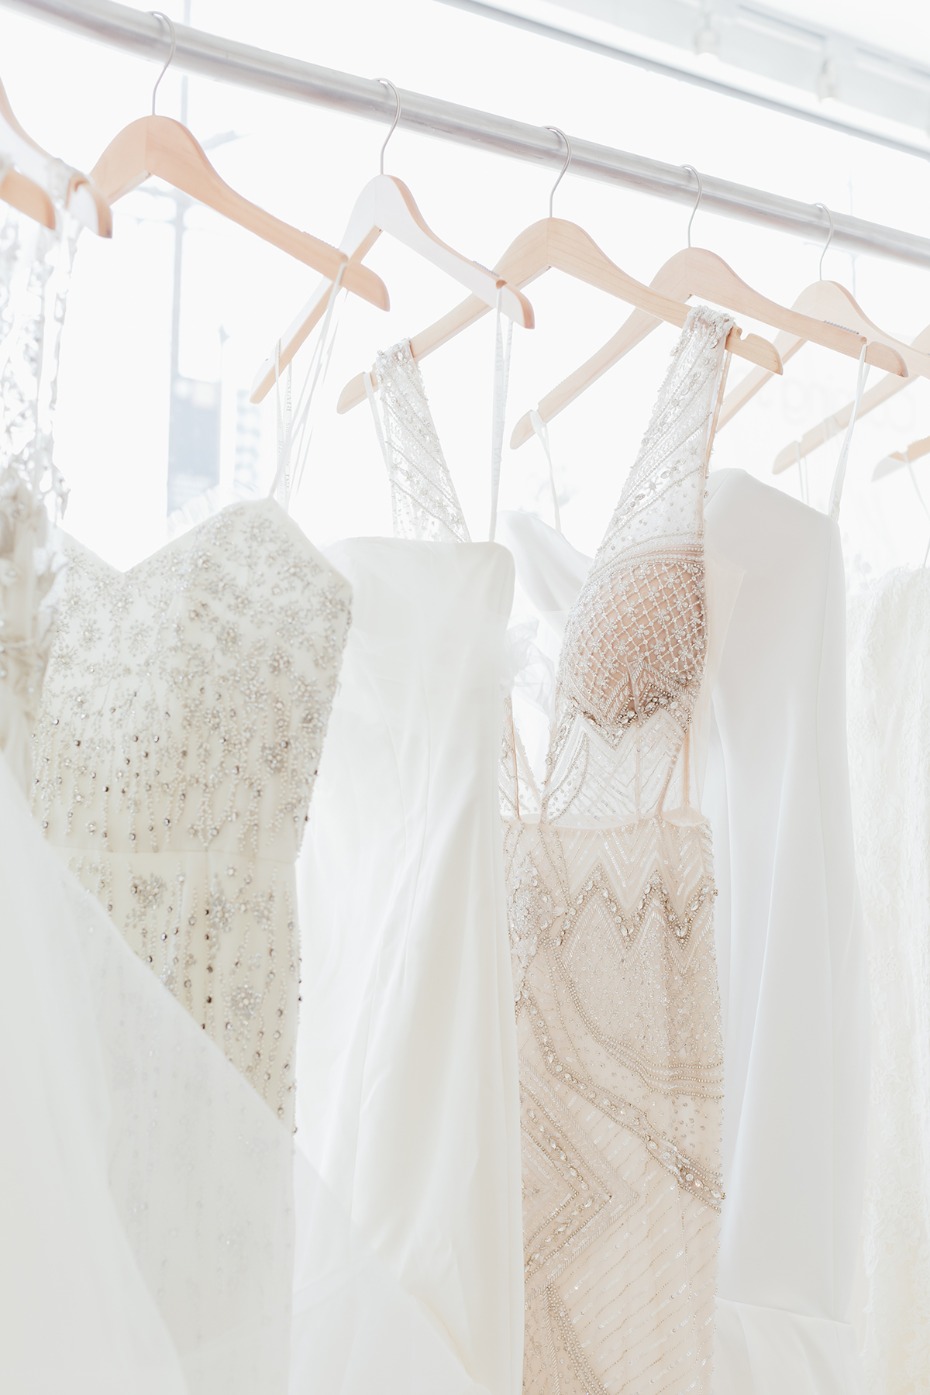 8 Tips on How to Survive a Bridal Salon Appointment